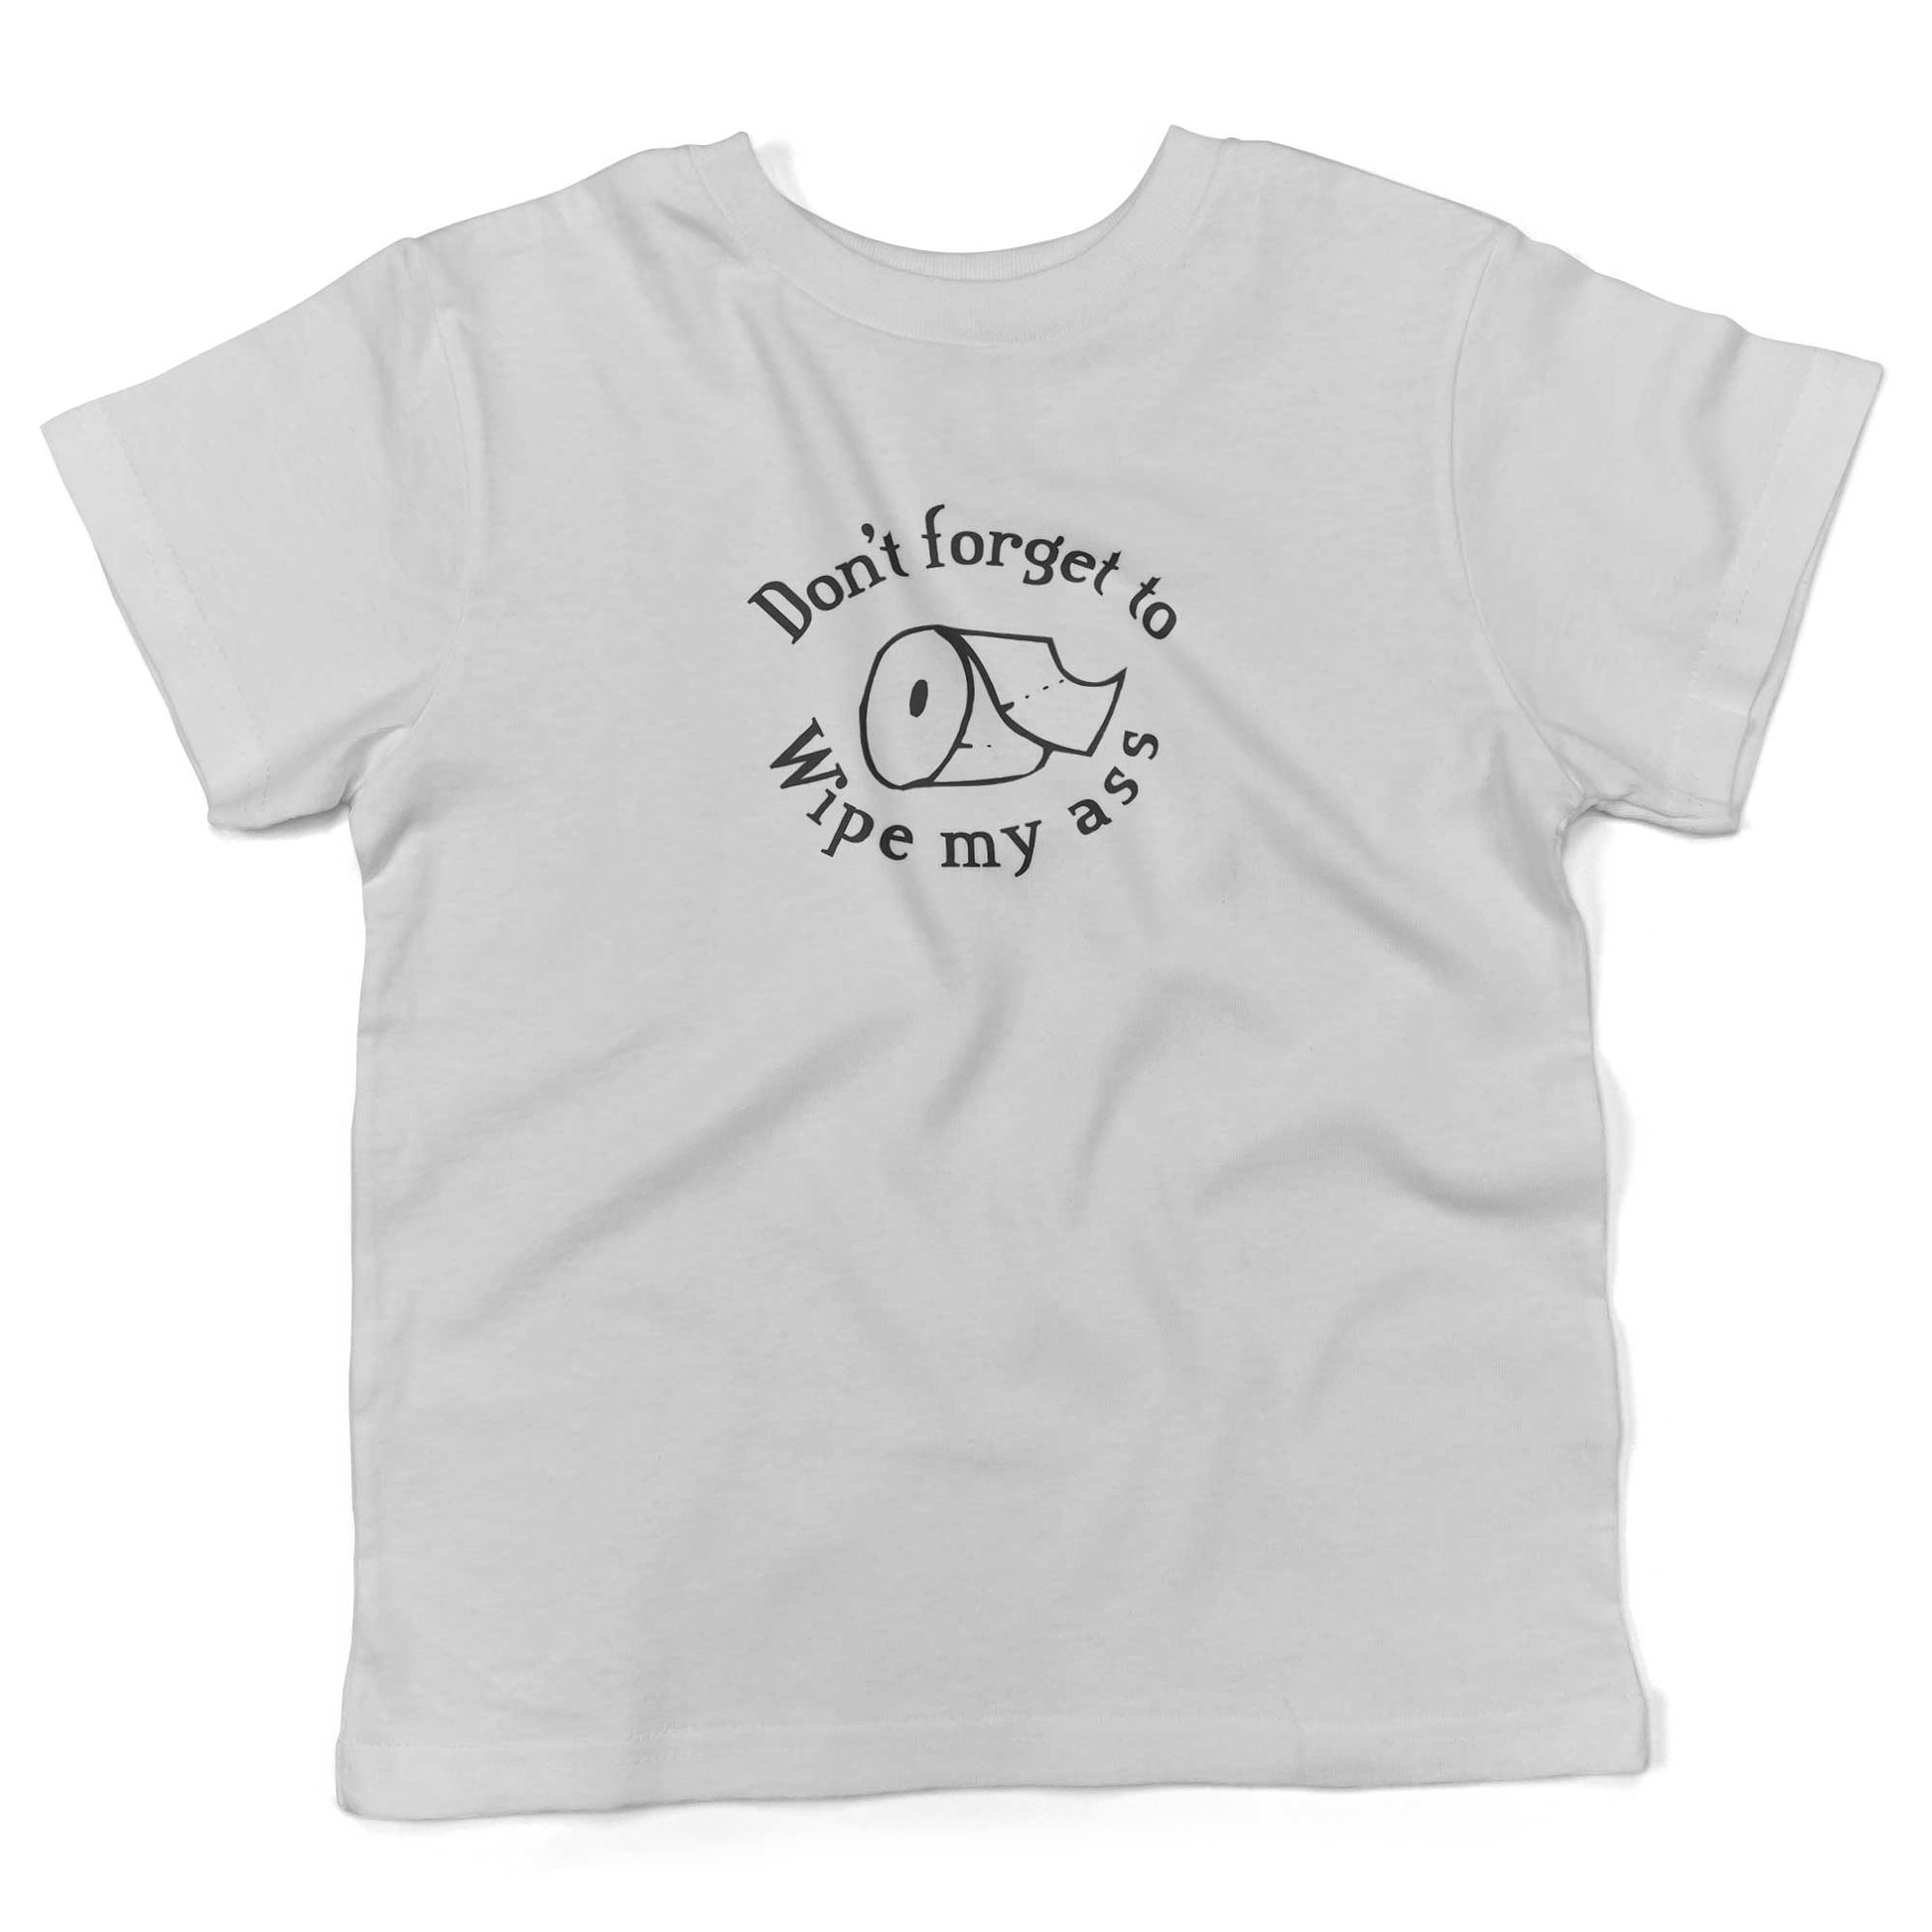 Don't Forget To Wipe My Ass Toddler Shirt-White-2T